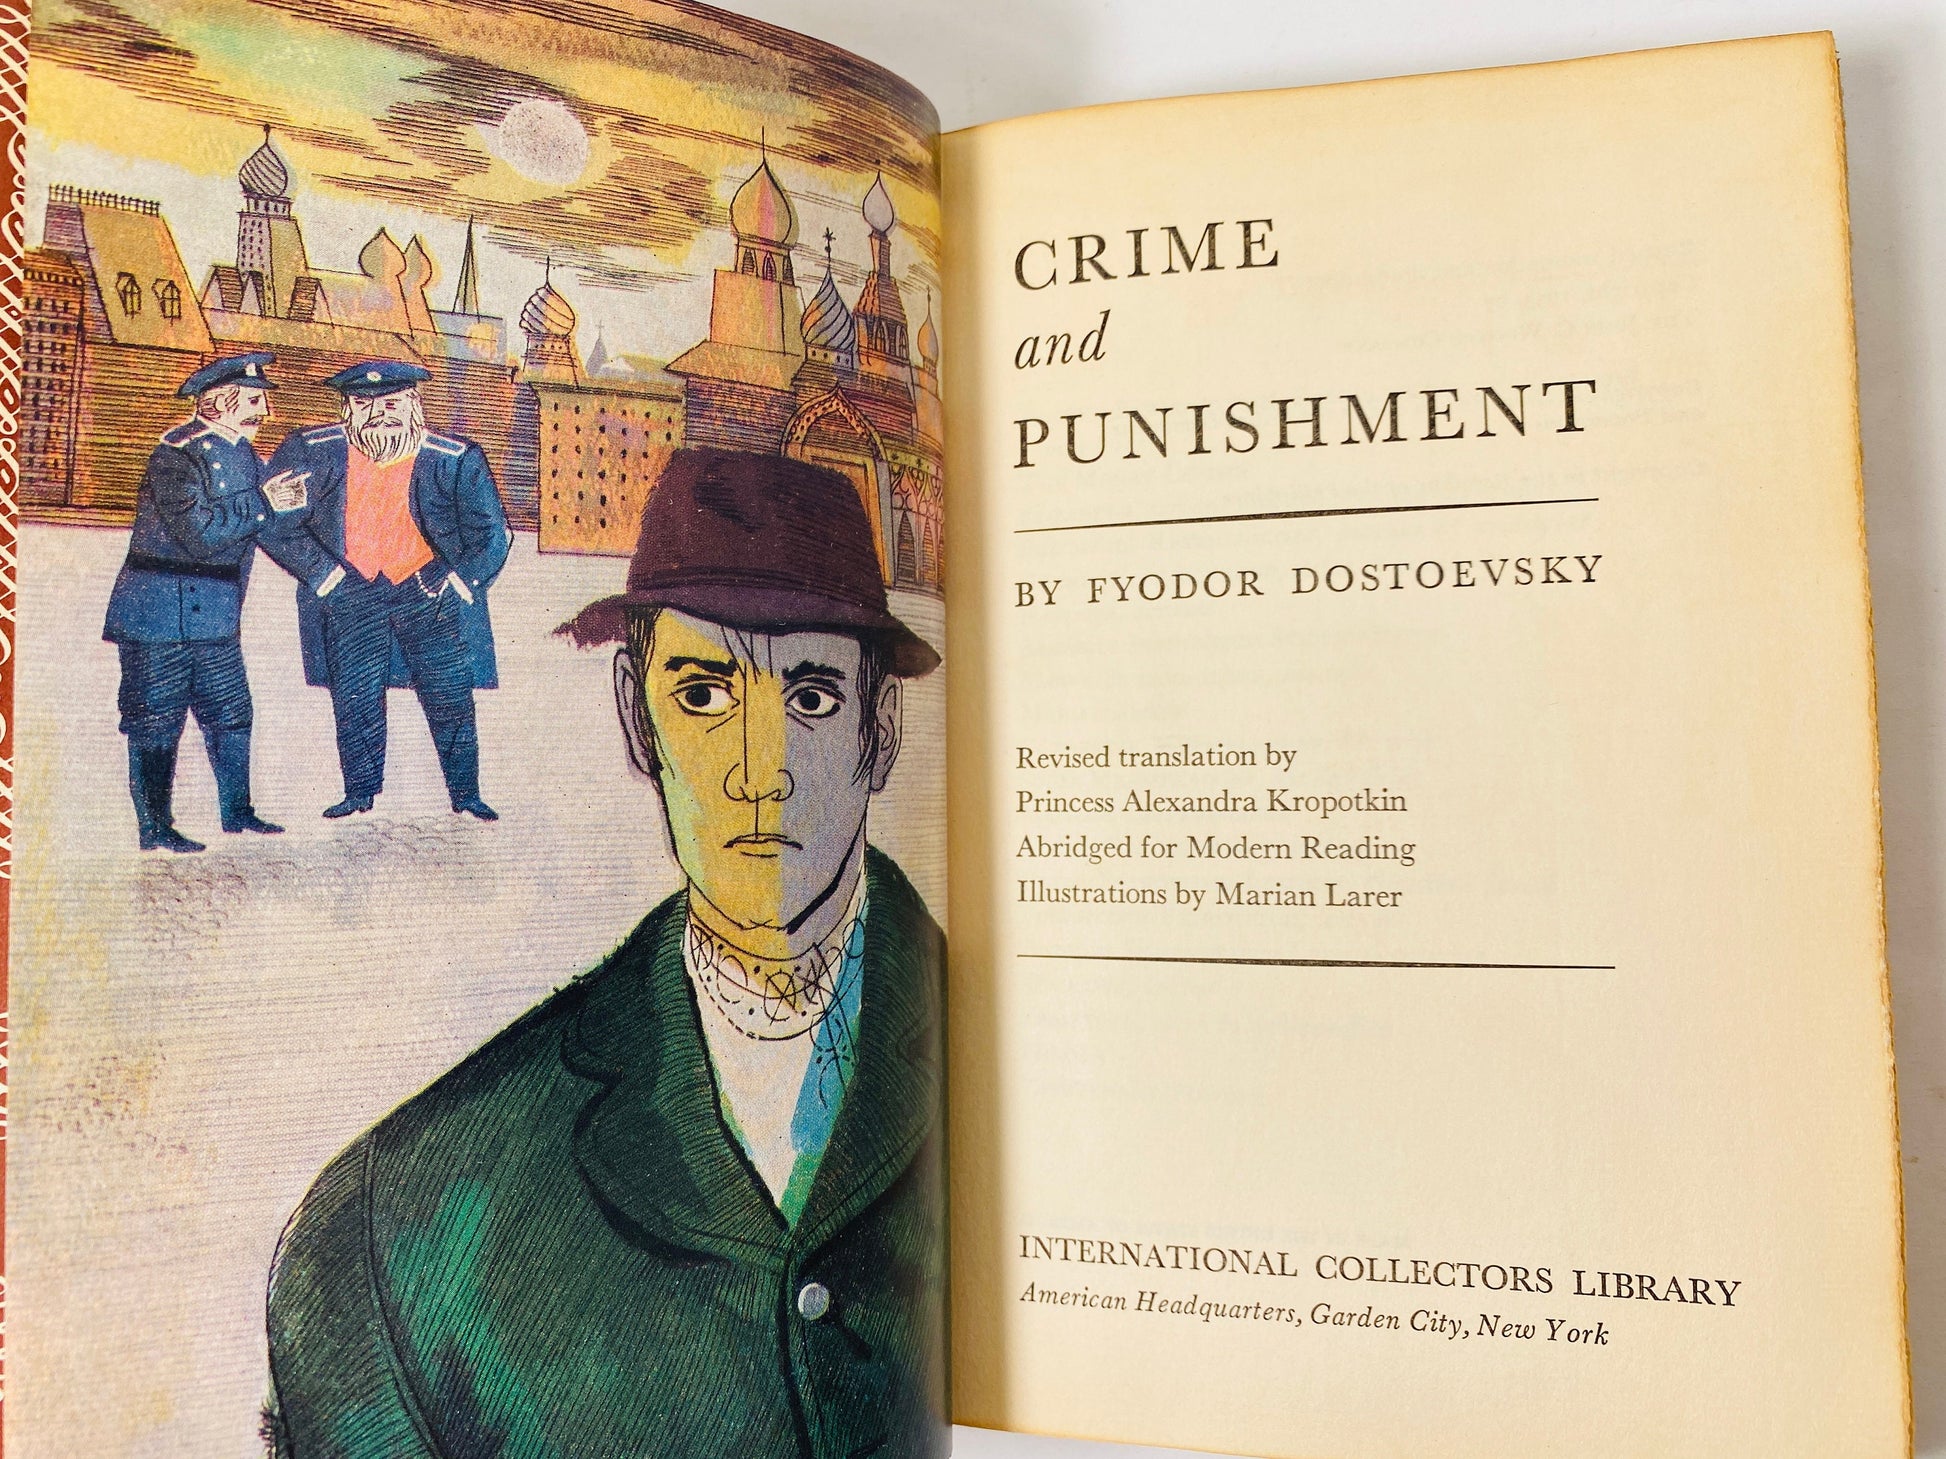 Crime and Punishment by Fyodor Dostoevsky Vintage International Collectors Library book in Czar Alexander binding. Red cover & gold inlay